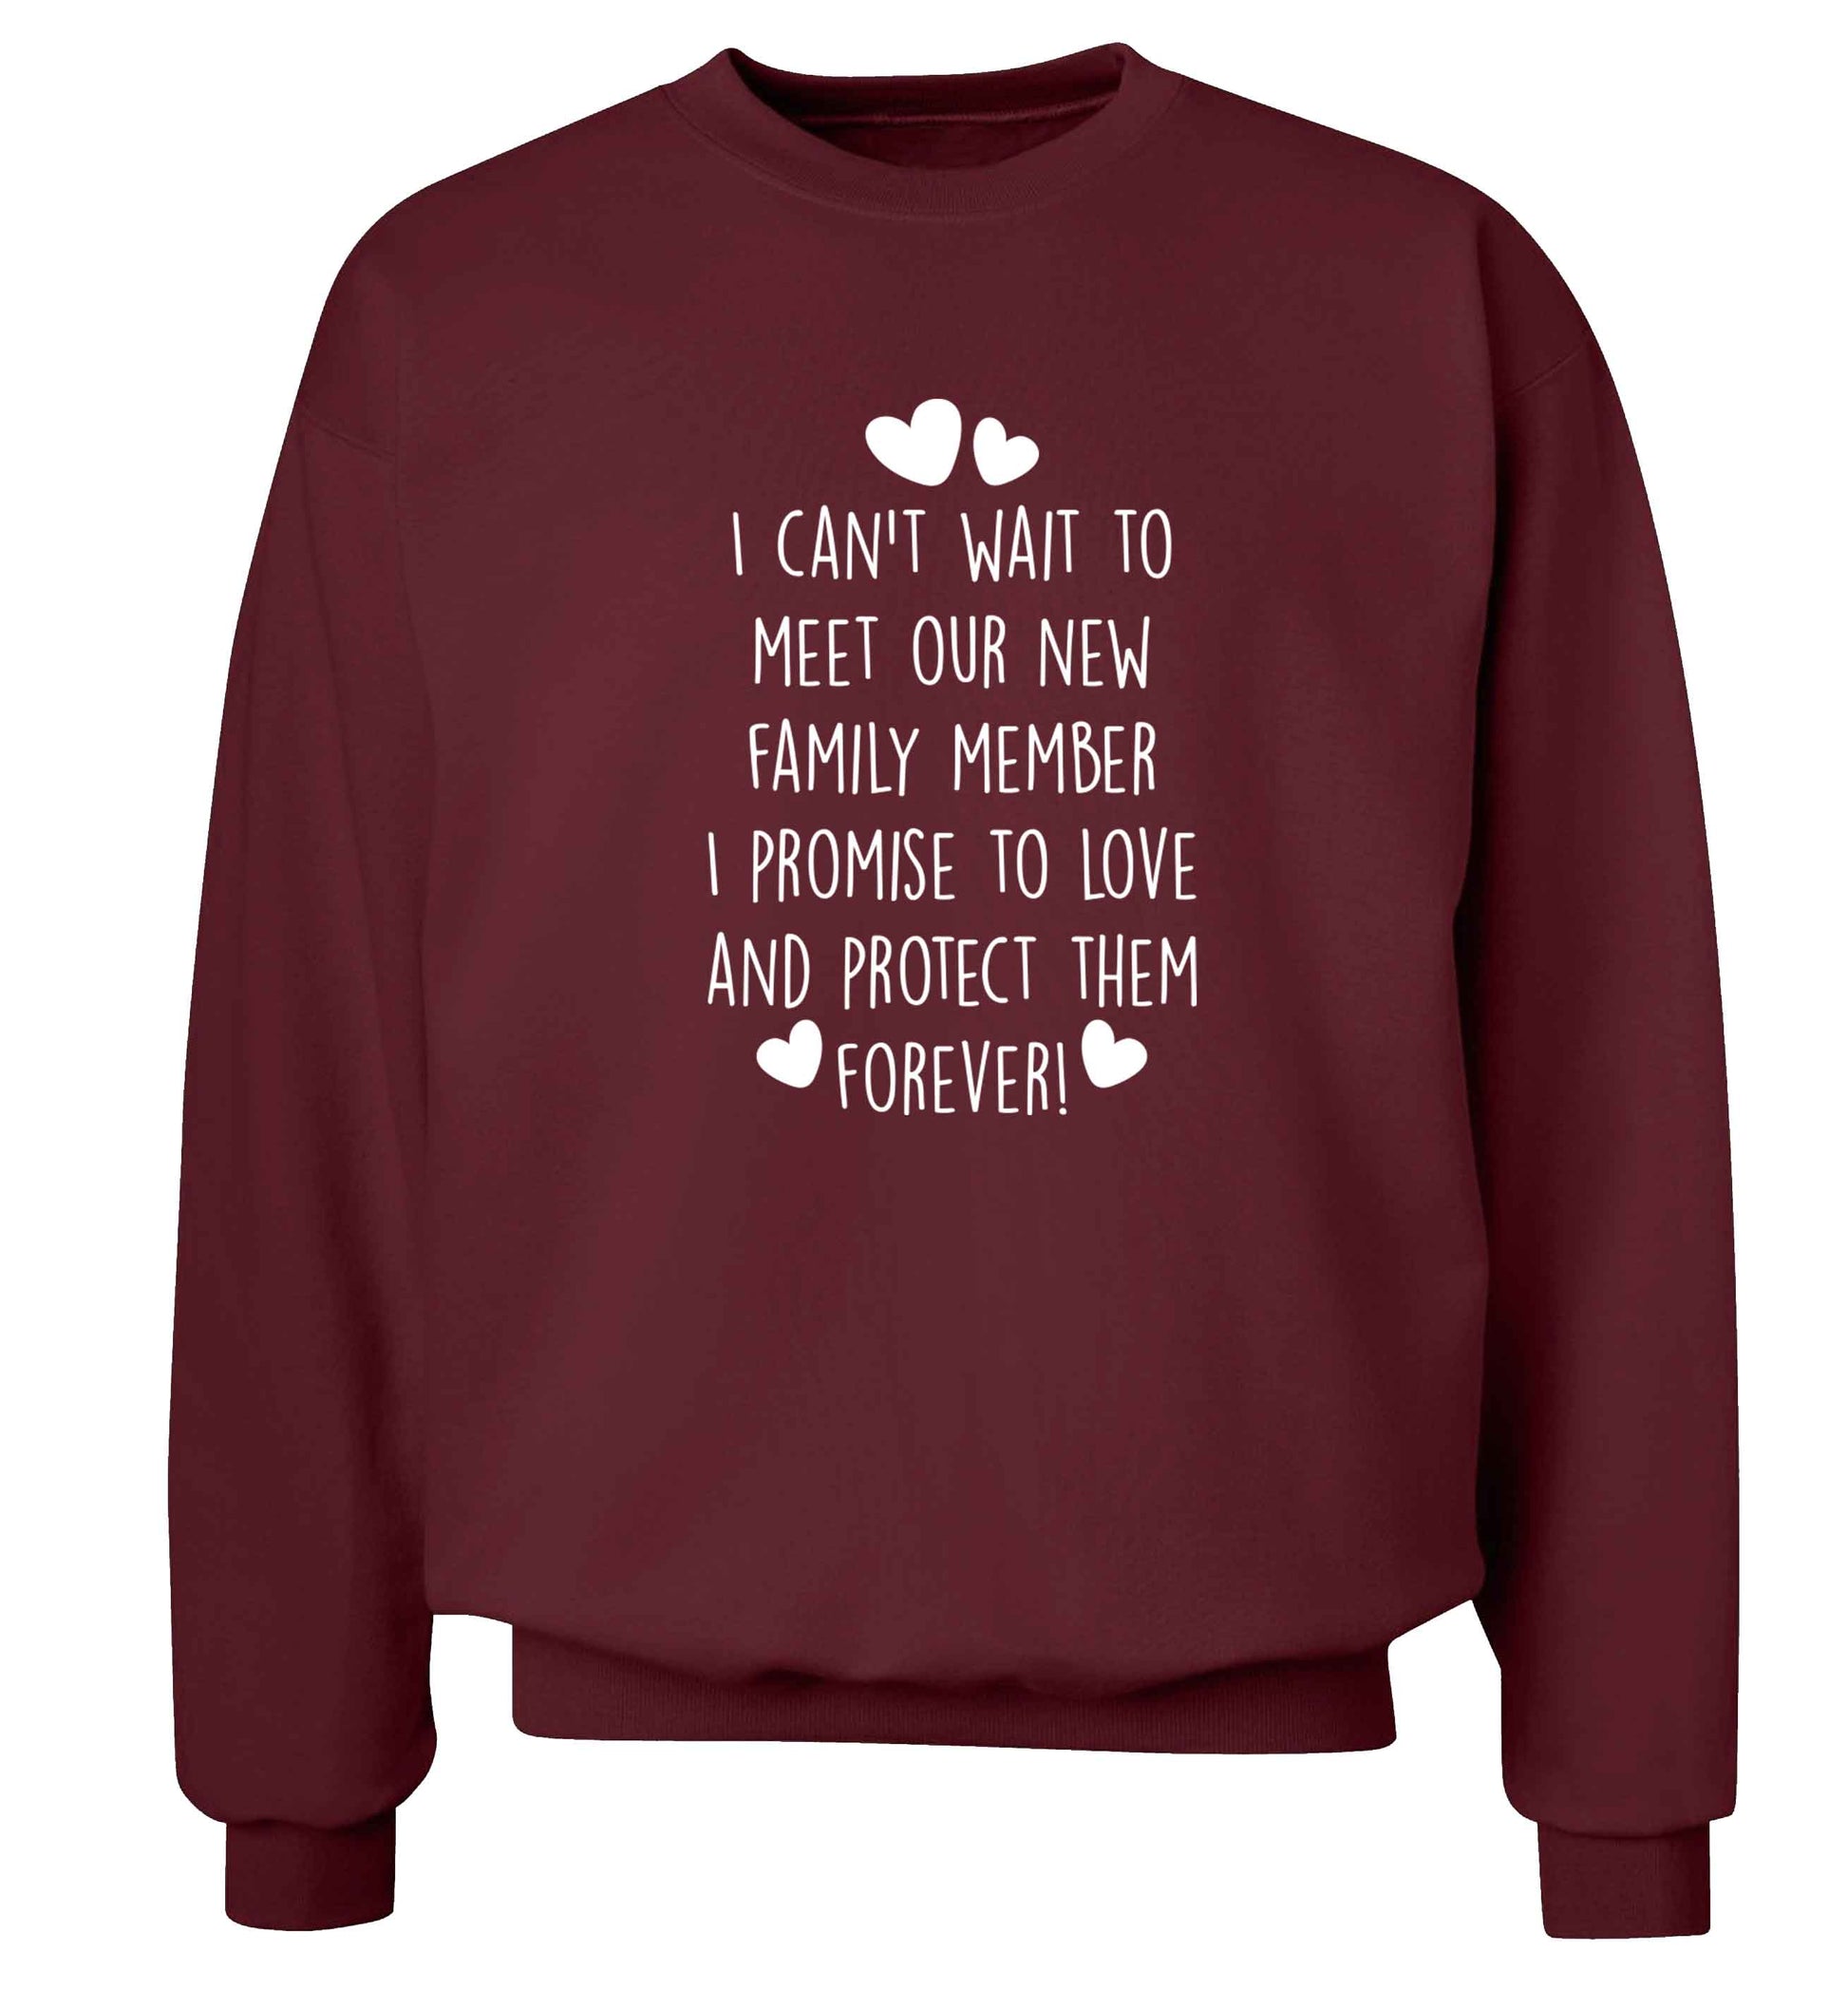 I can't wait to meet our new family member I promise to love and protect them foreverAdult's unisex maroon Sweater 2XL